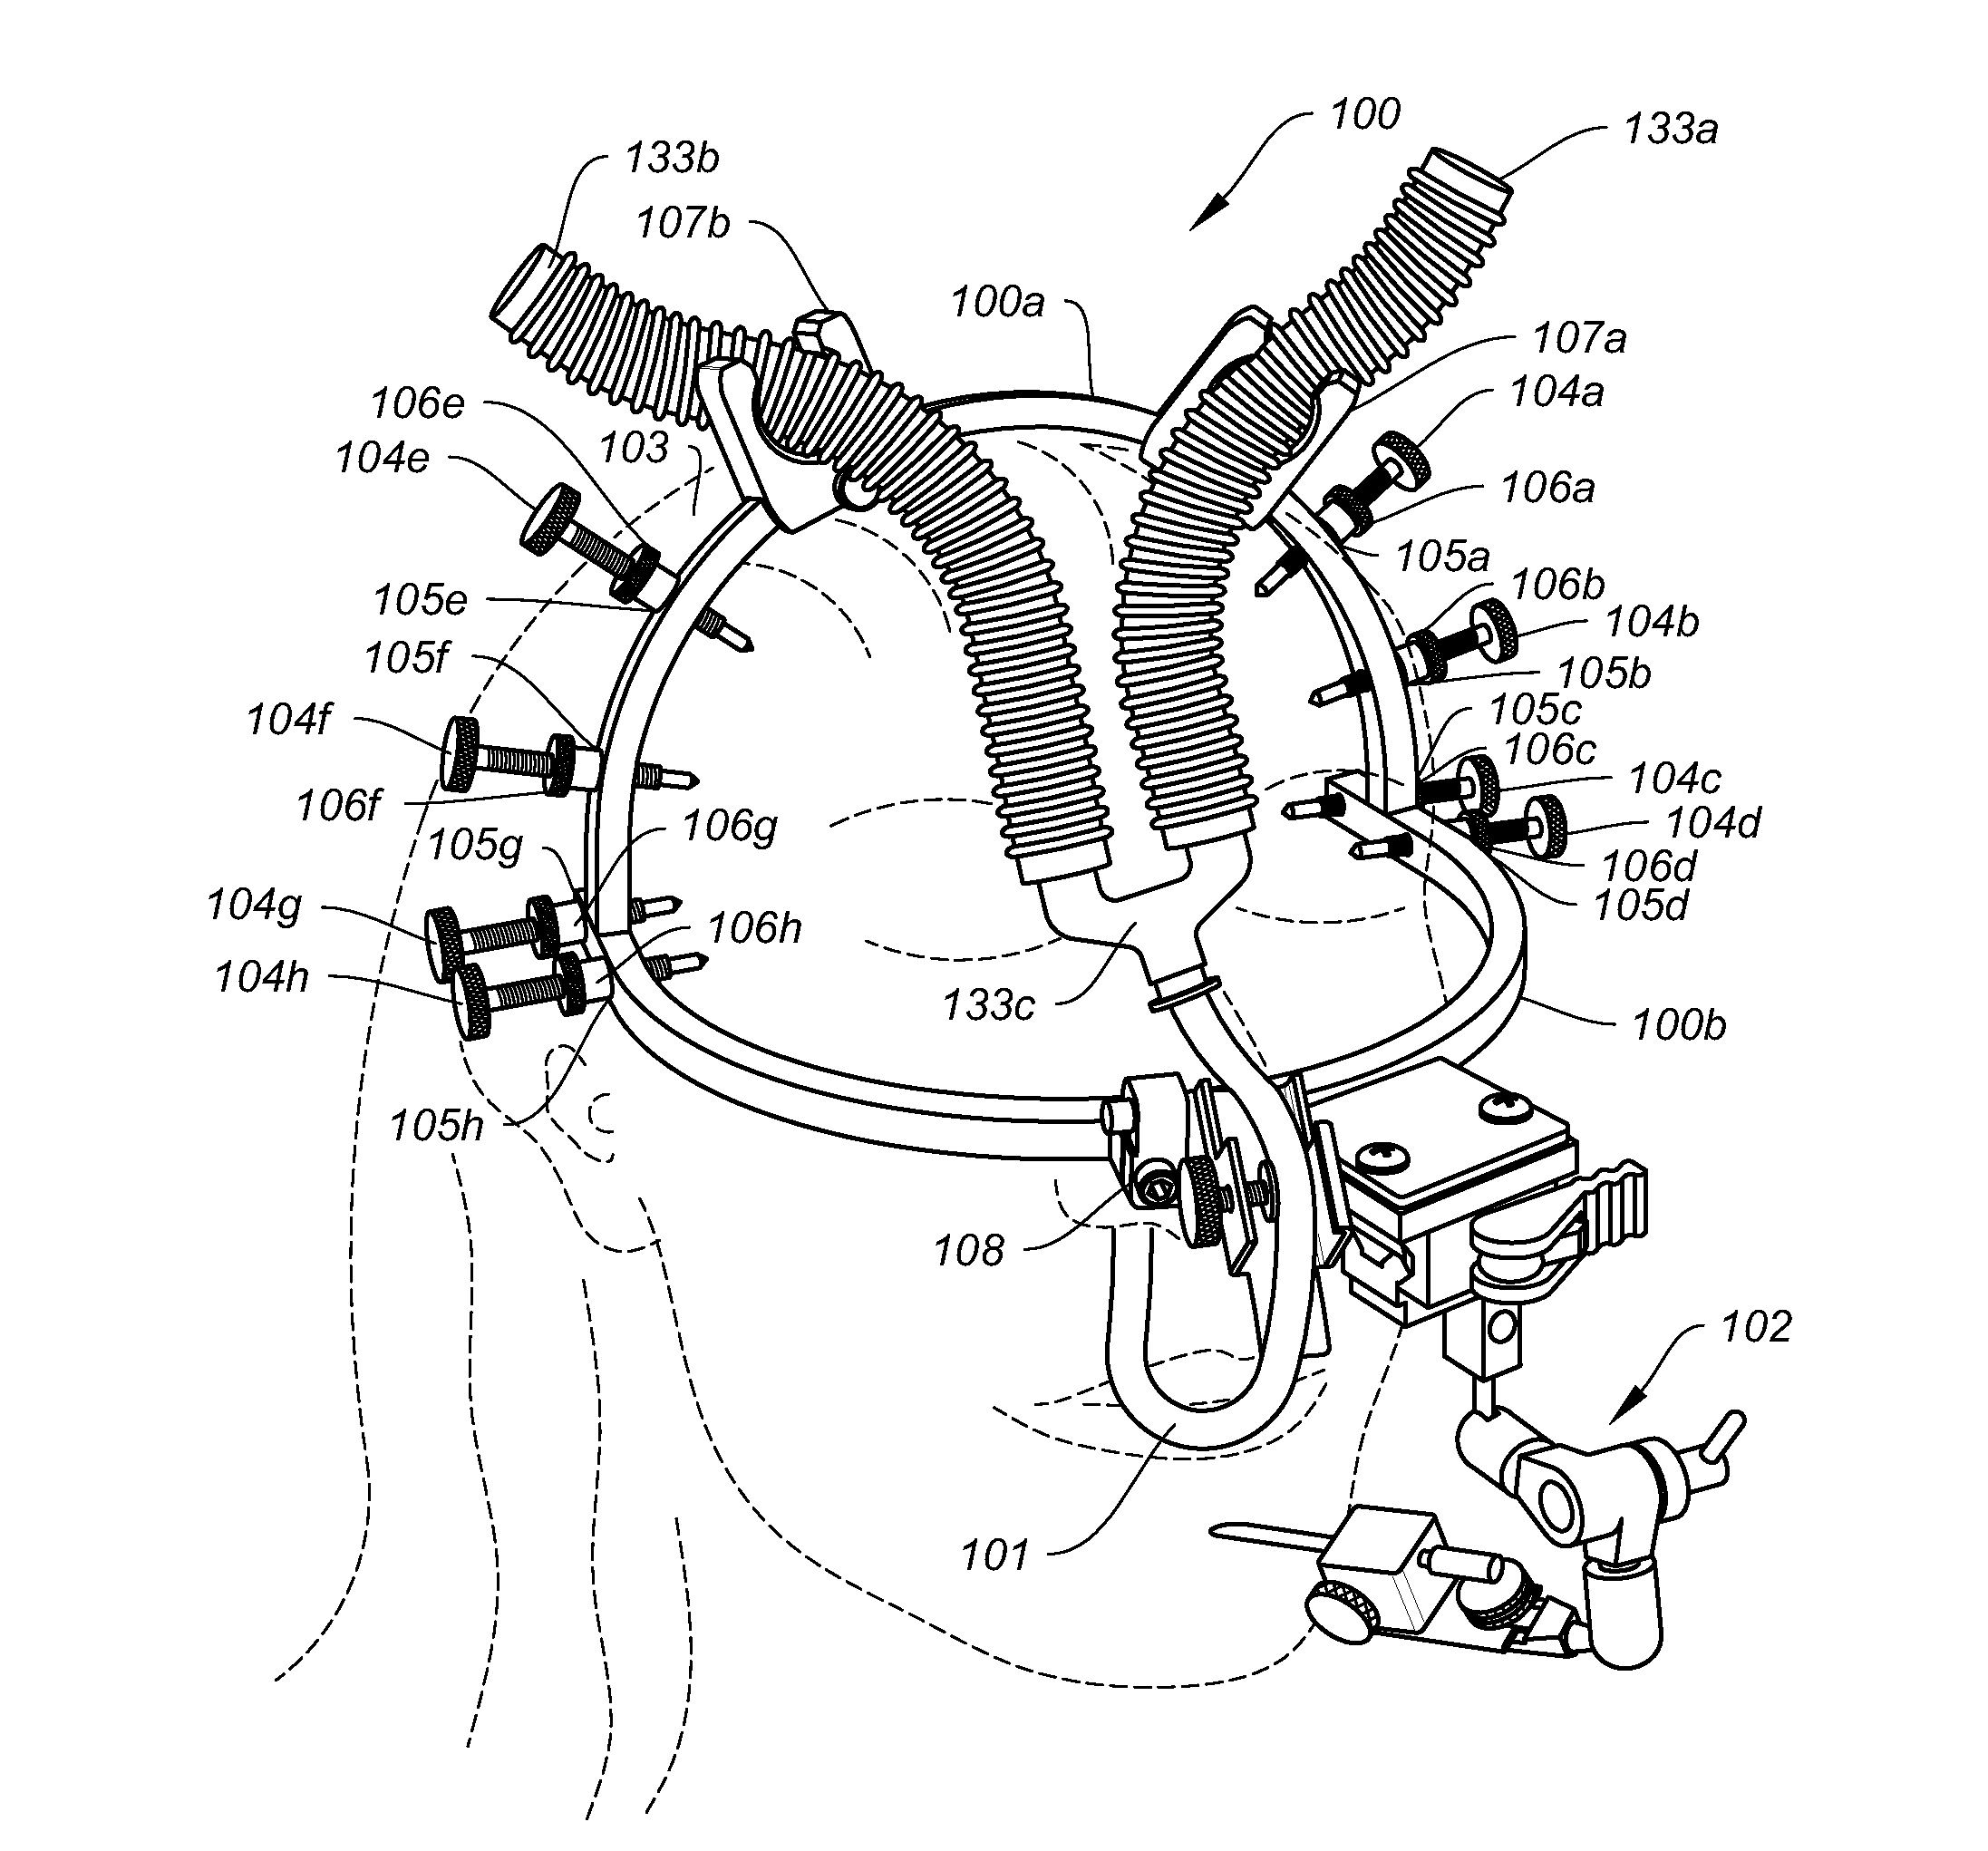 Apparatus and method for oral and maxillofacial surgery and preoperative modeling